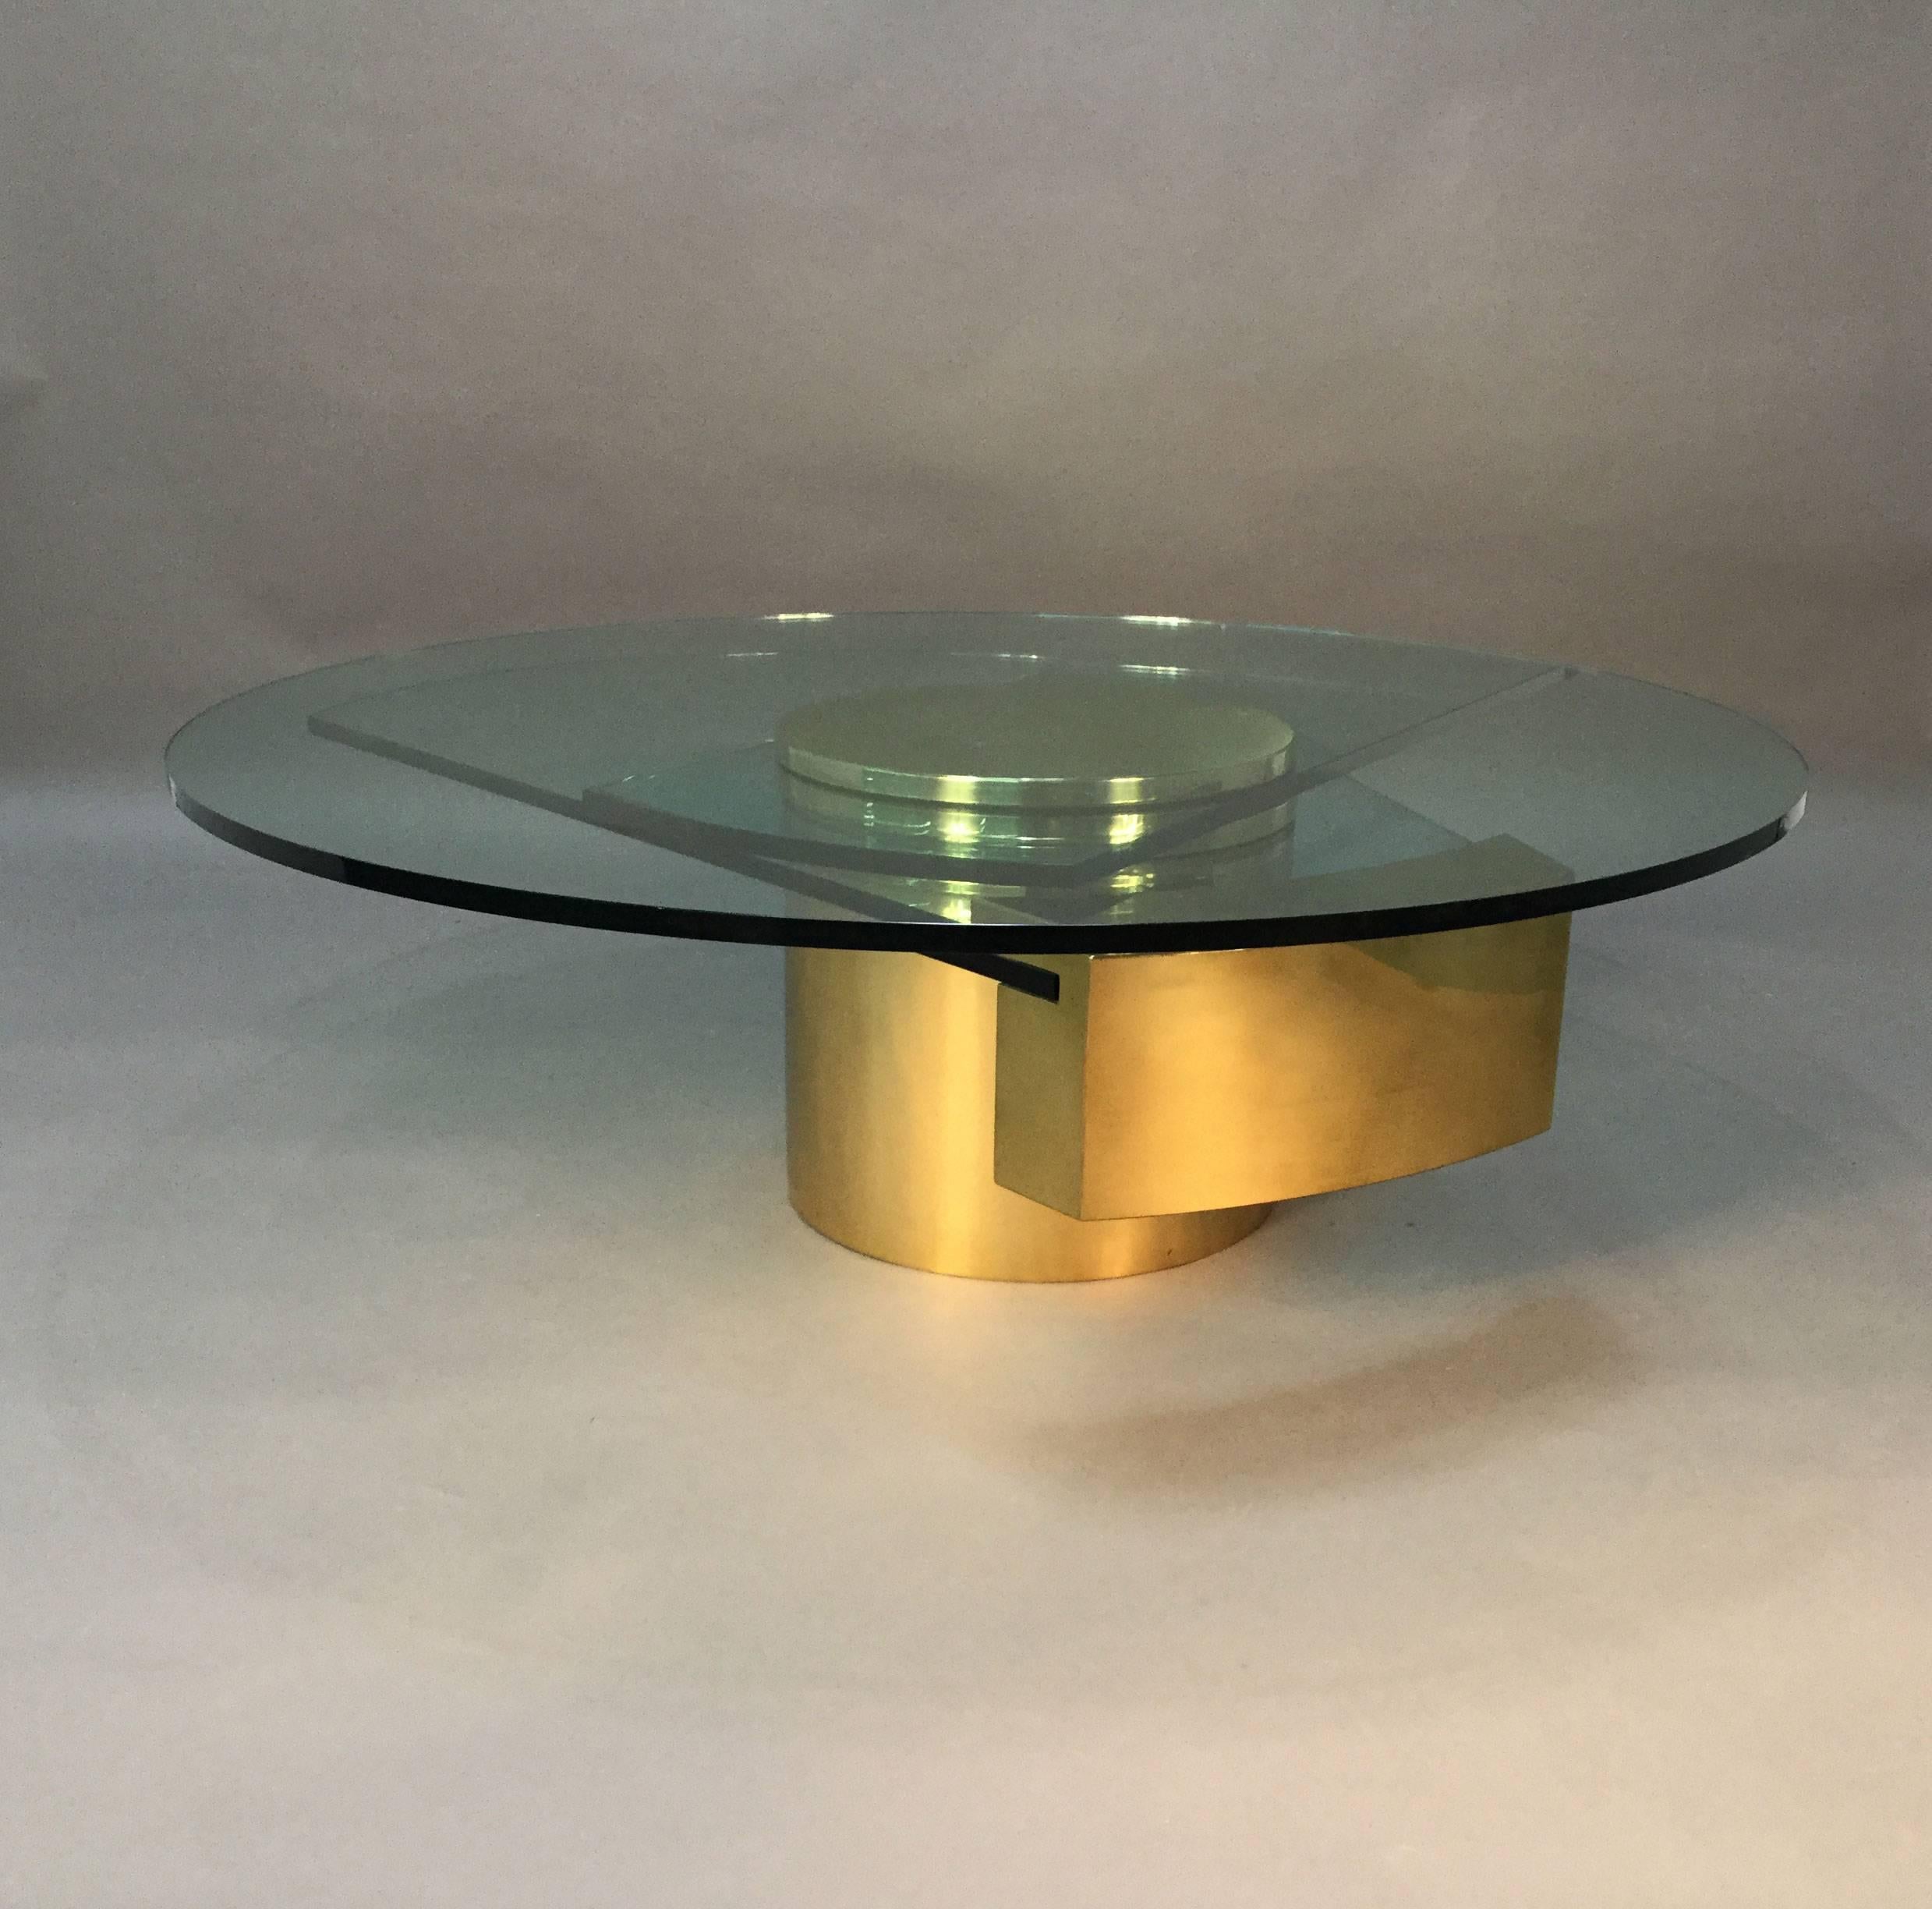 This is an amazing, designed by Dakota Jackson, coffee table. Brass drum base. Three different levels of glass, all rotating. Incredible thick glass plates, with brass frame.